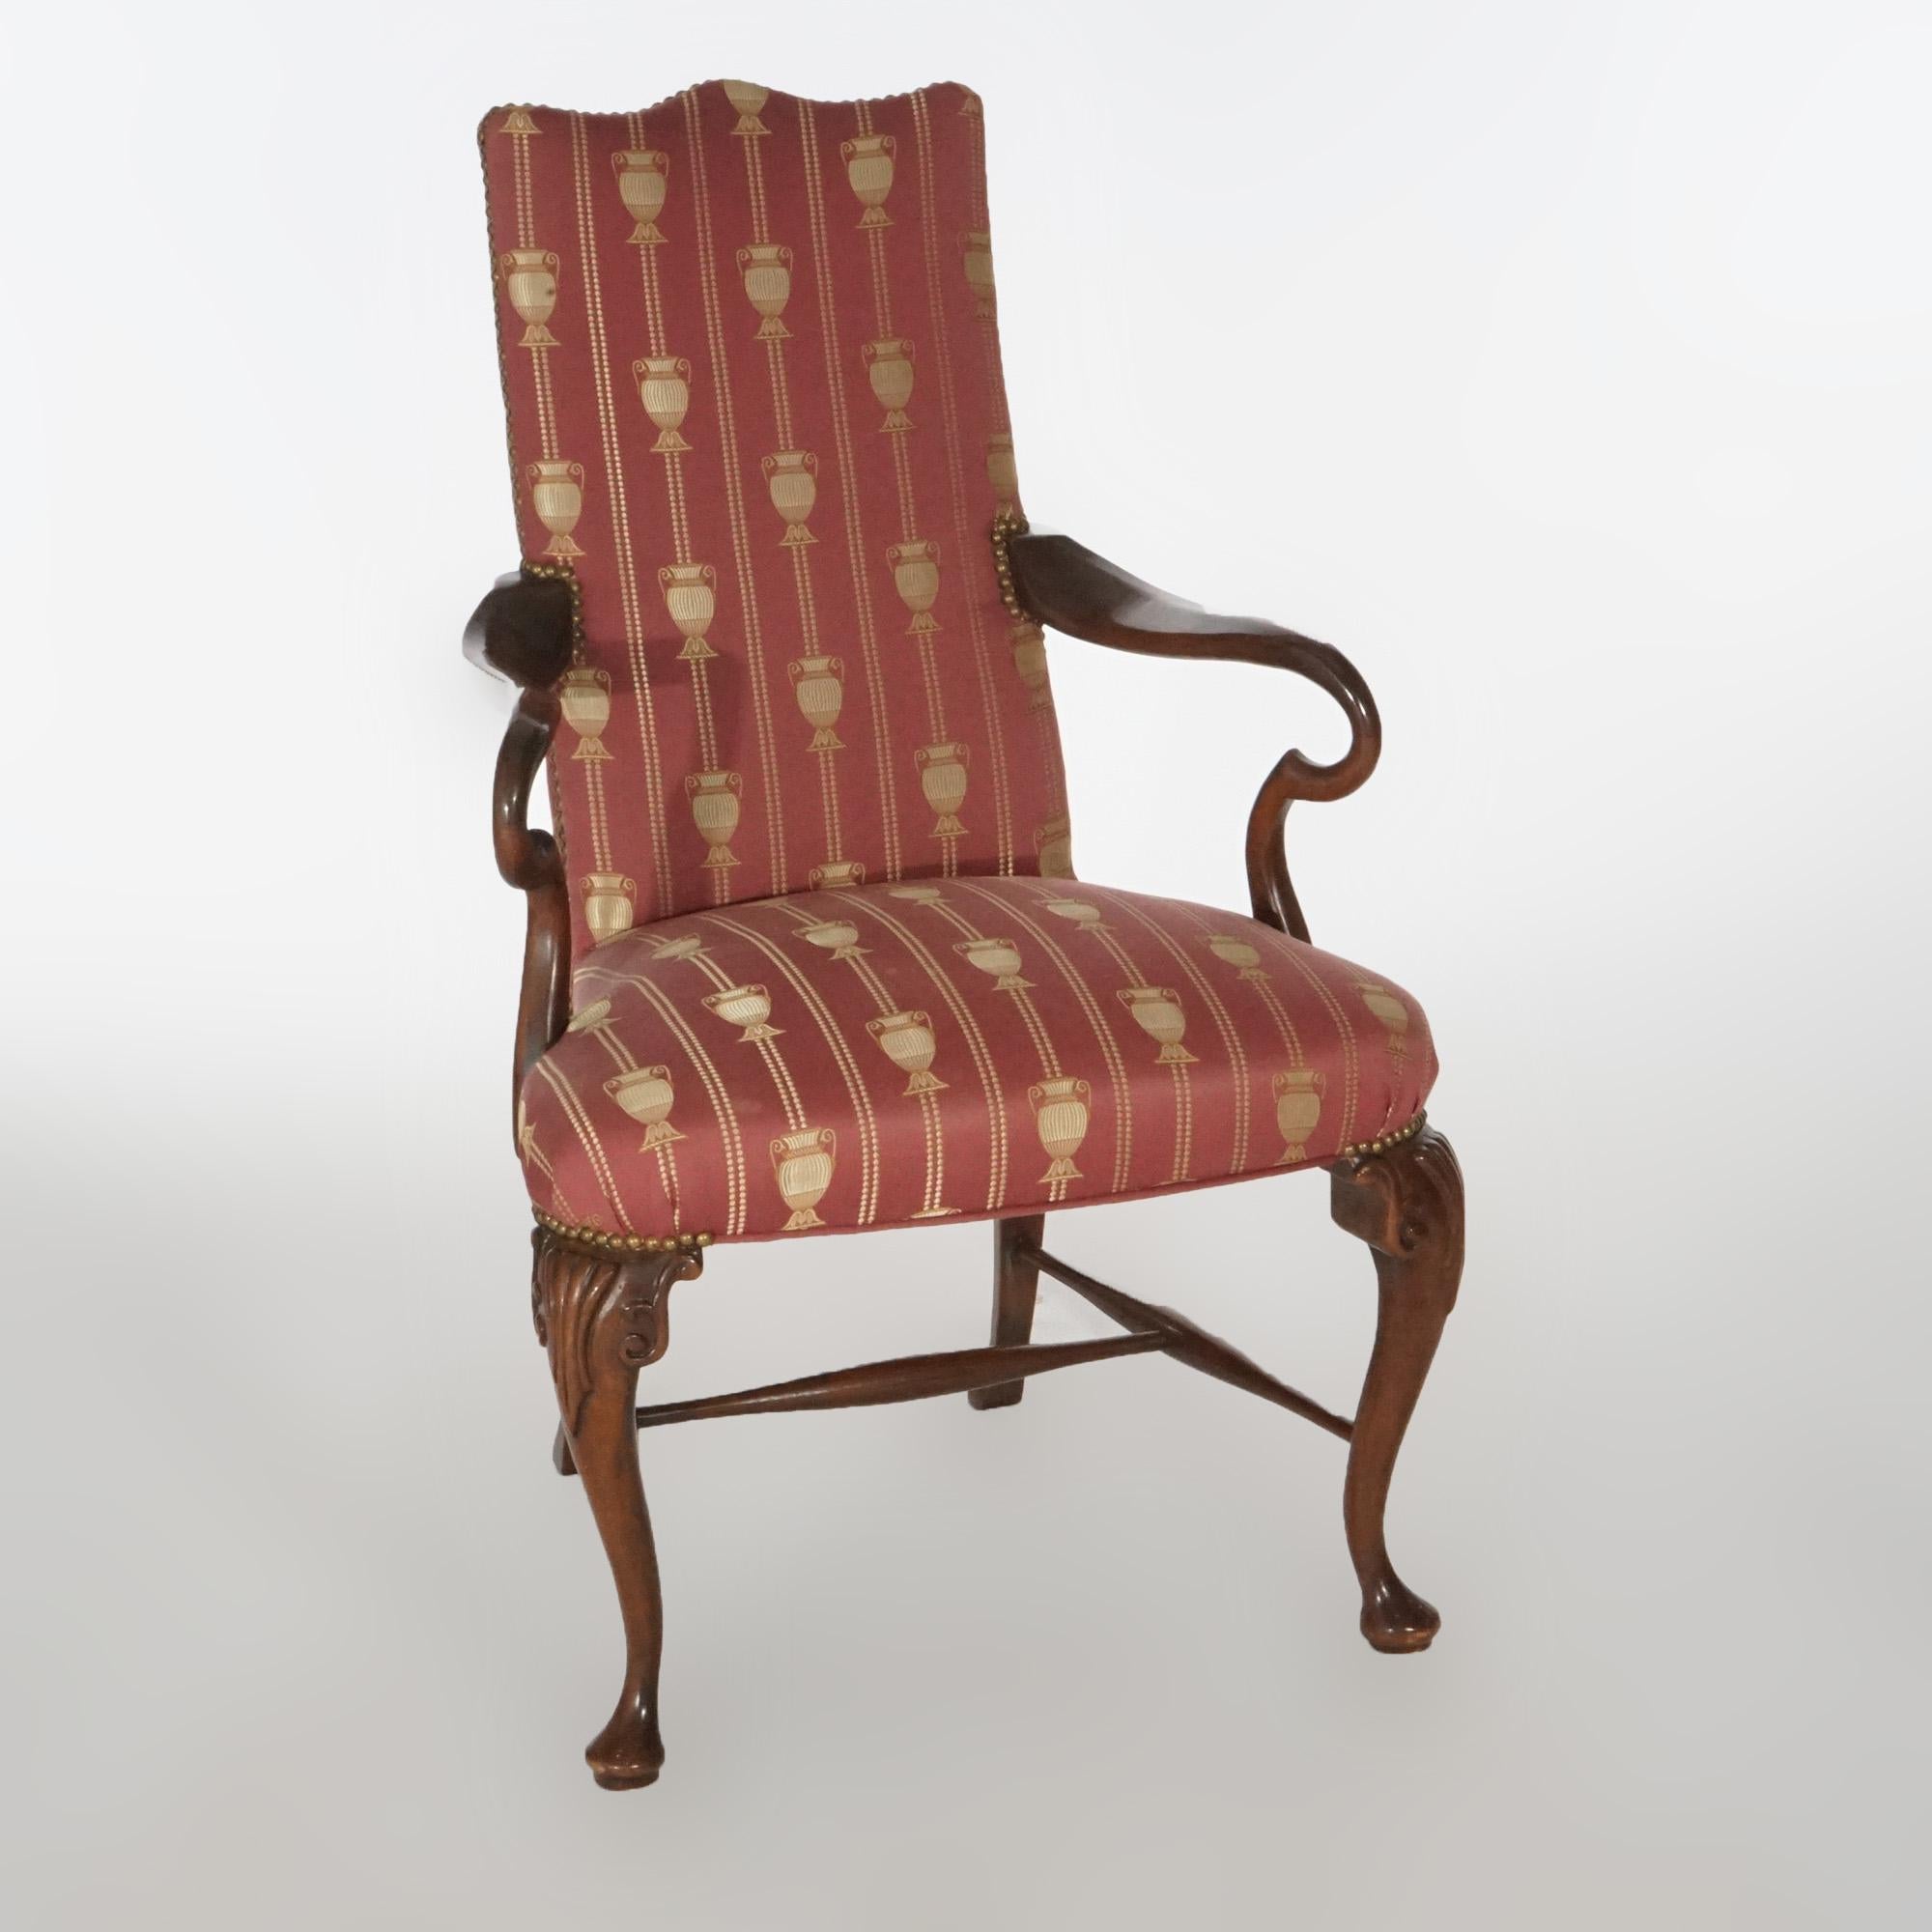 A Queen Anne style armchair offers upholstered back and seat over mahogany base having carved foliate elements and raised on cabriole legs terminating in pad feet, circa 1940.

Measures- 41.25''H x 25.5''W x 26''D.